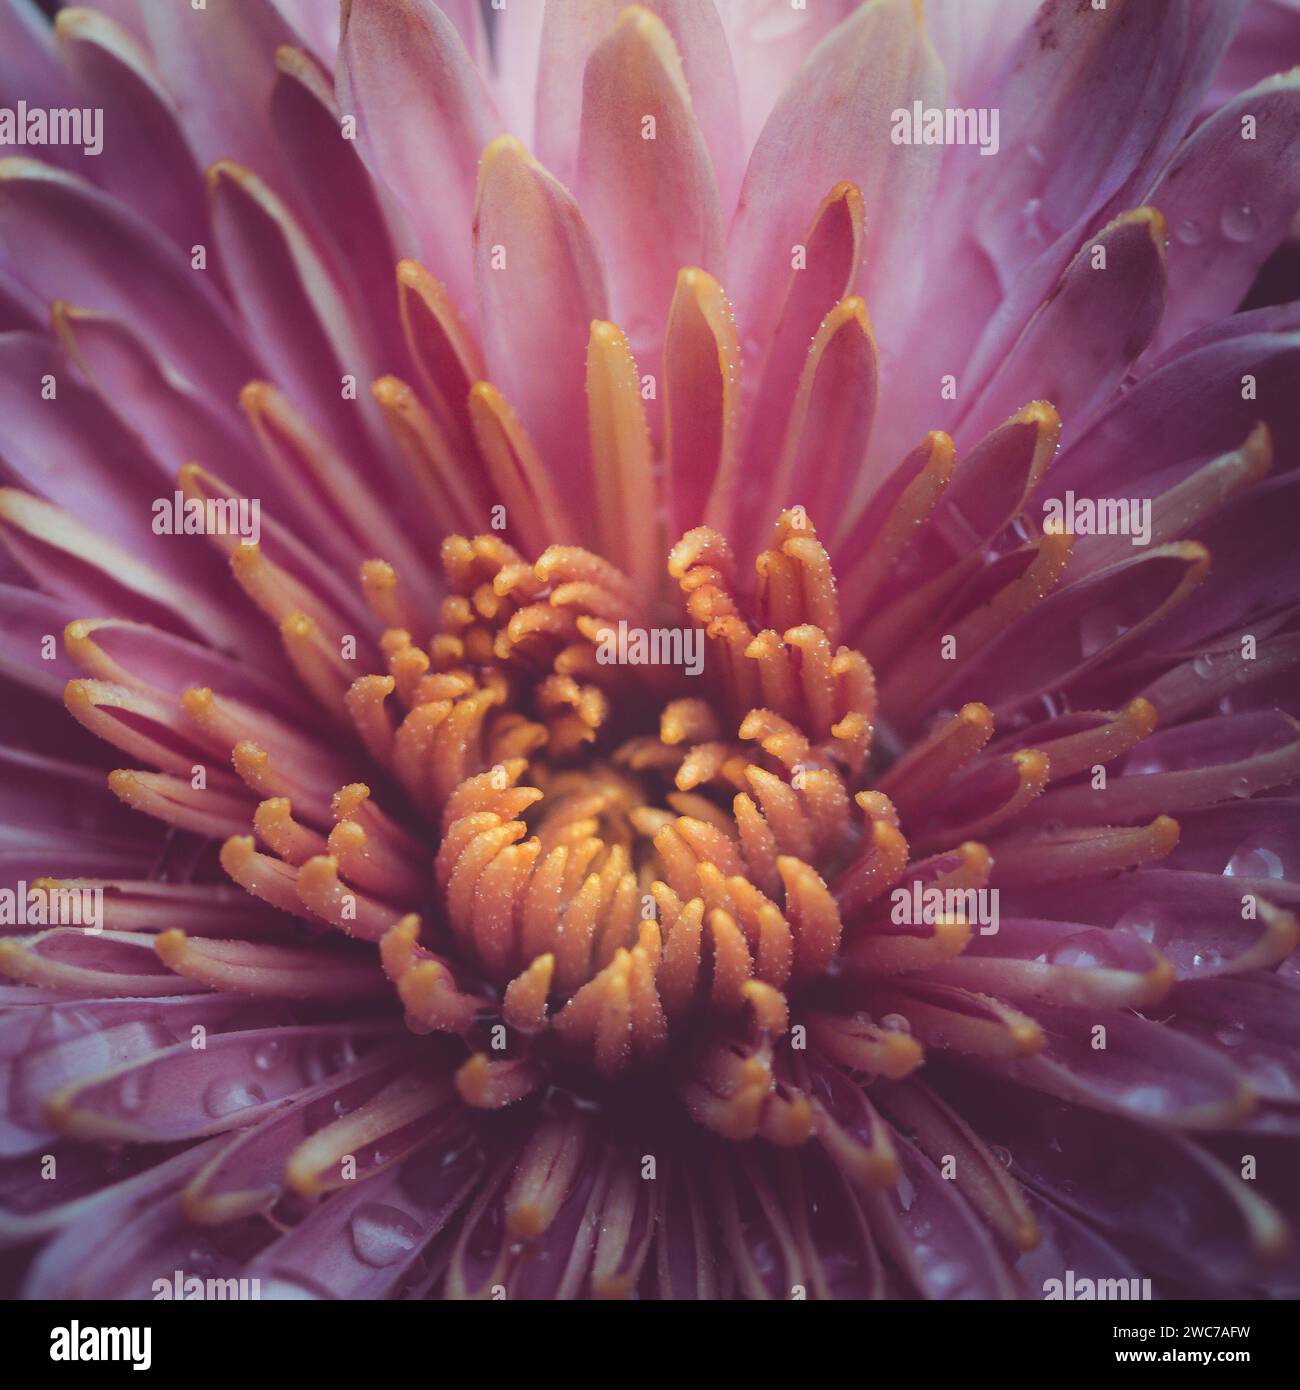 Chrysanthemum, also known as Garden mum or Florist's daisy. A Chinese native plant. Stock Photo